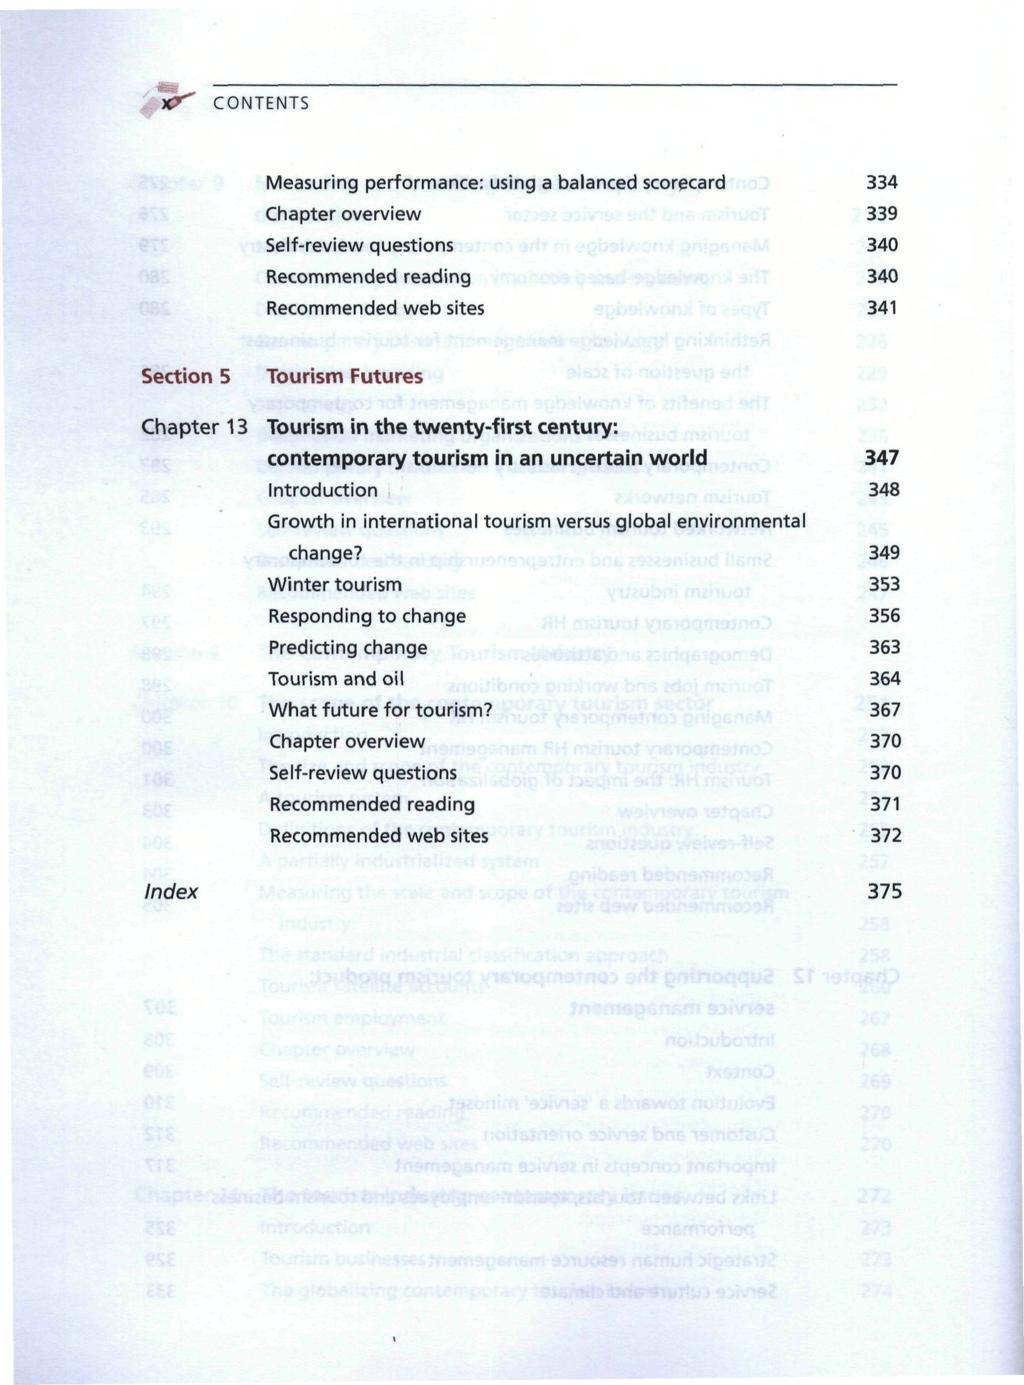 Measuring performance: using a balanced scorecard Chapter overview v 334 339 340 340 341 Section 5 Tourism Futures Chapter 13 Tourism in the twenty-first century: contemporary tourism in an uncertain